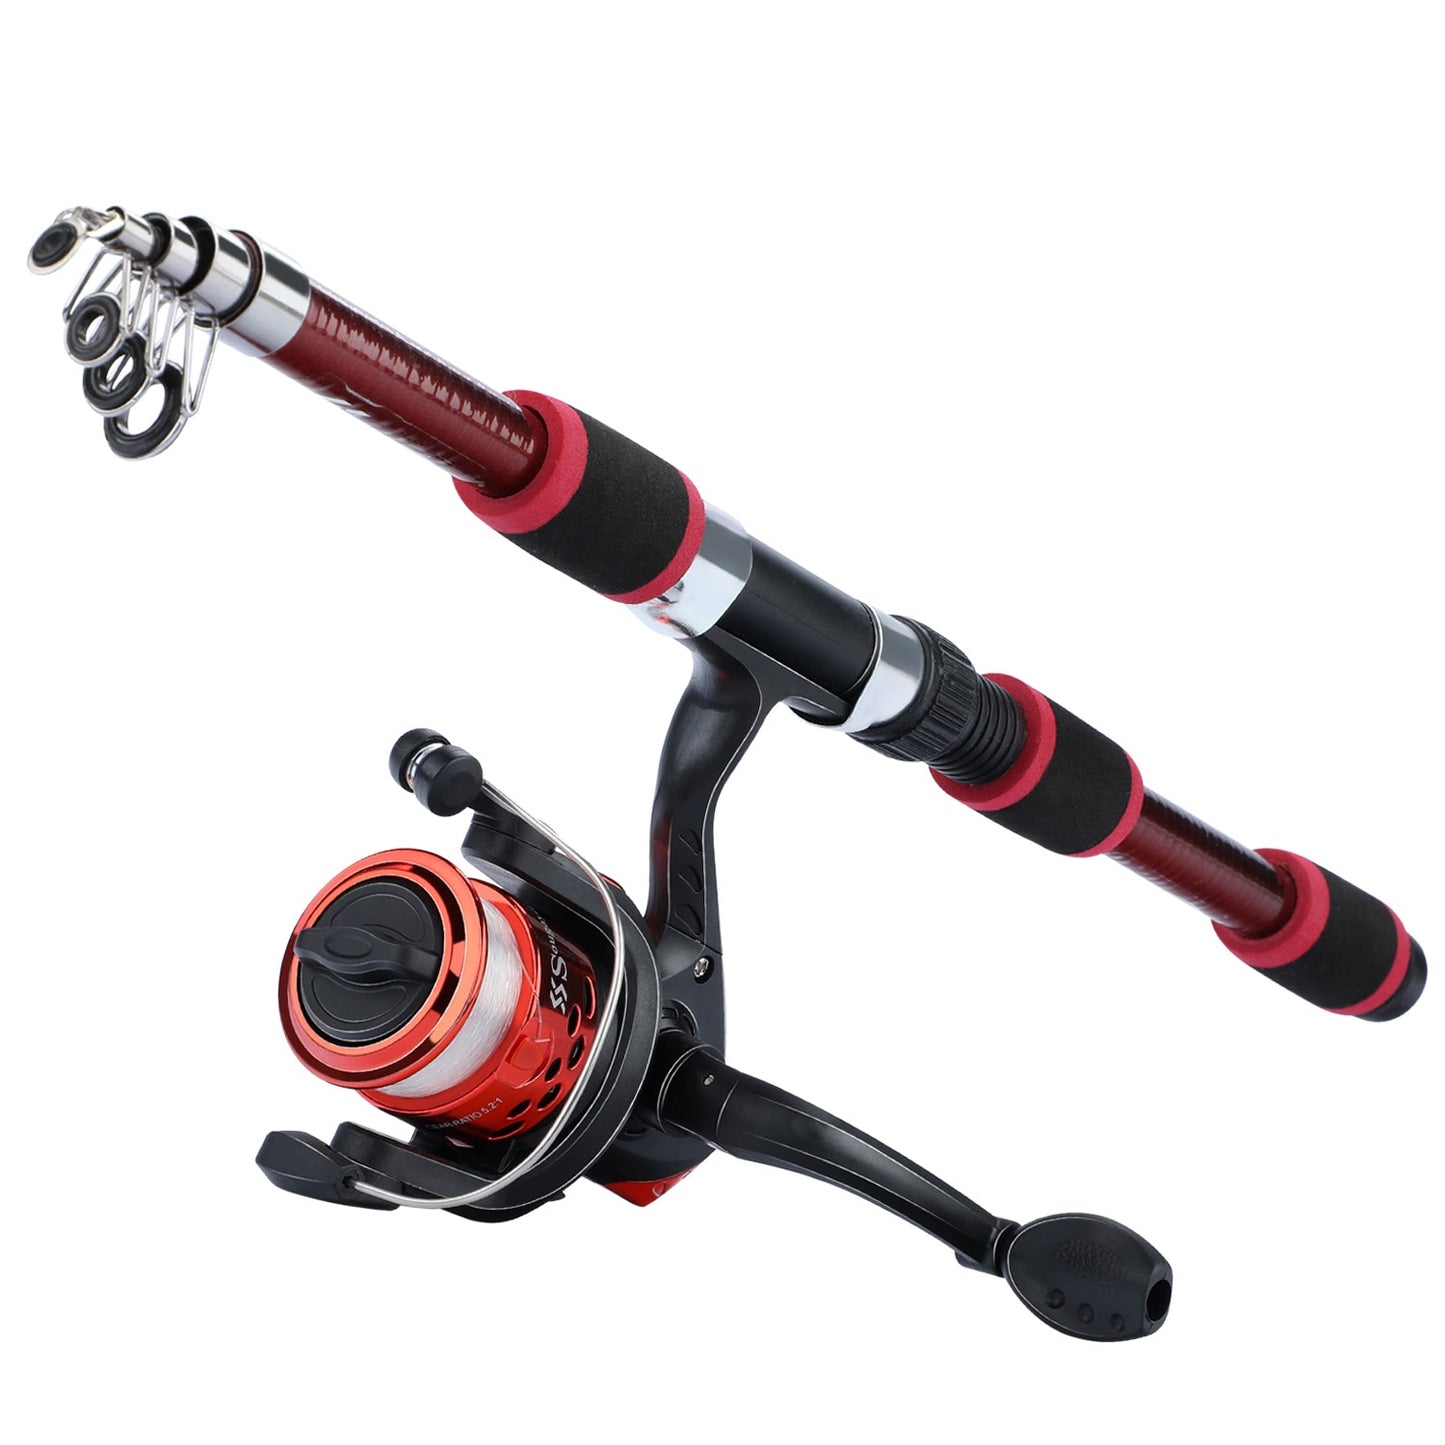 Spinning Fishing Rod and Reel Combo1.8M Telescopic Rod with 5.2:1 3BB Fishing